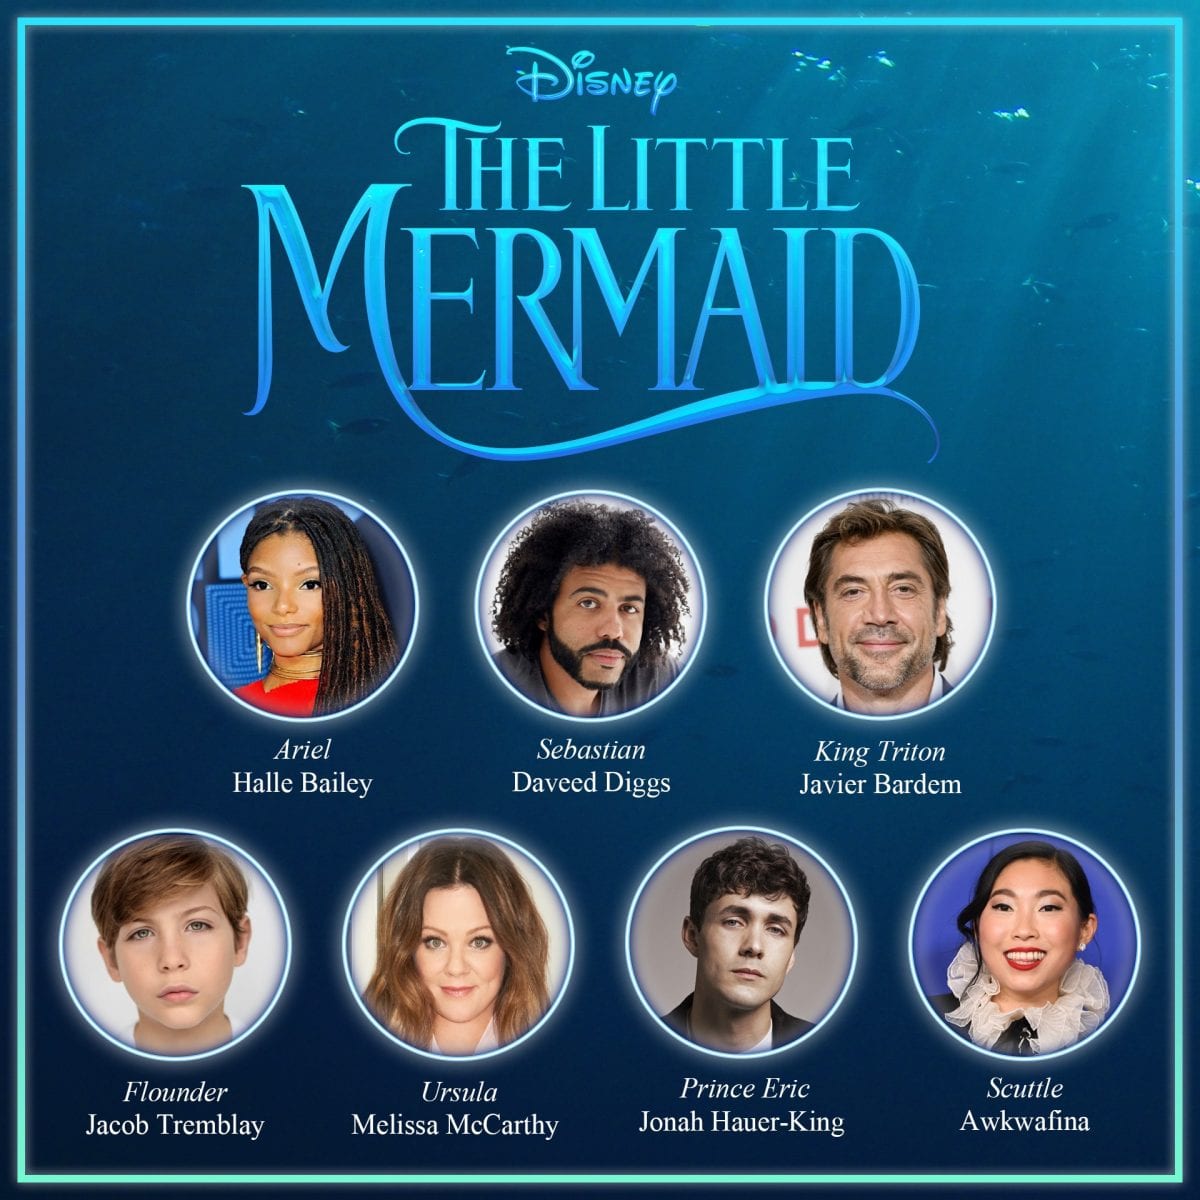 Disney’s The Little Mermaid Live Action AllStar Lineup Includes Javier